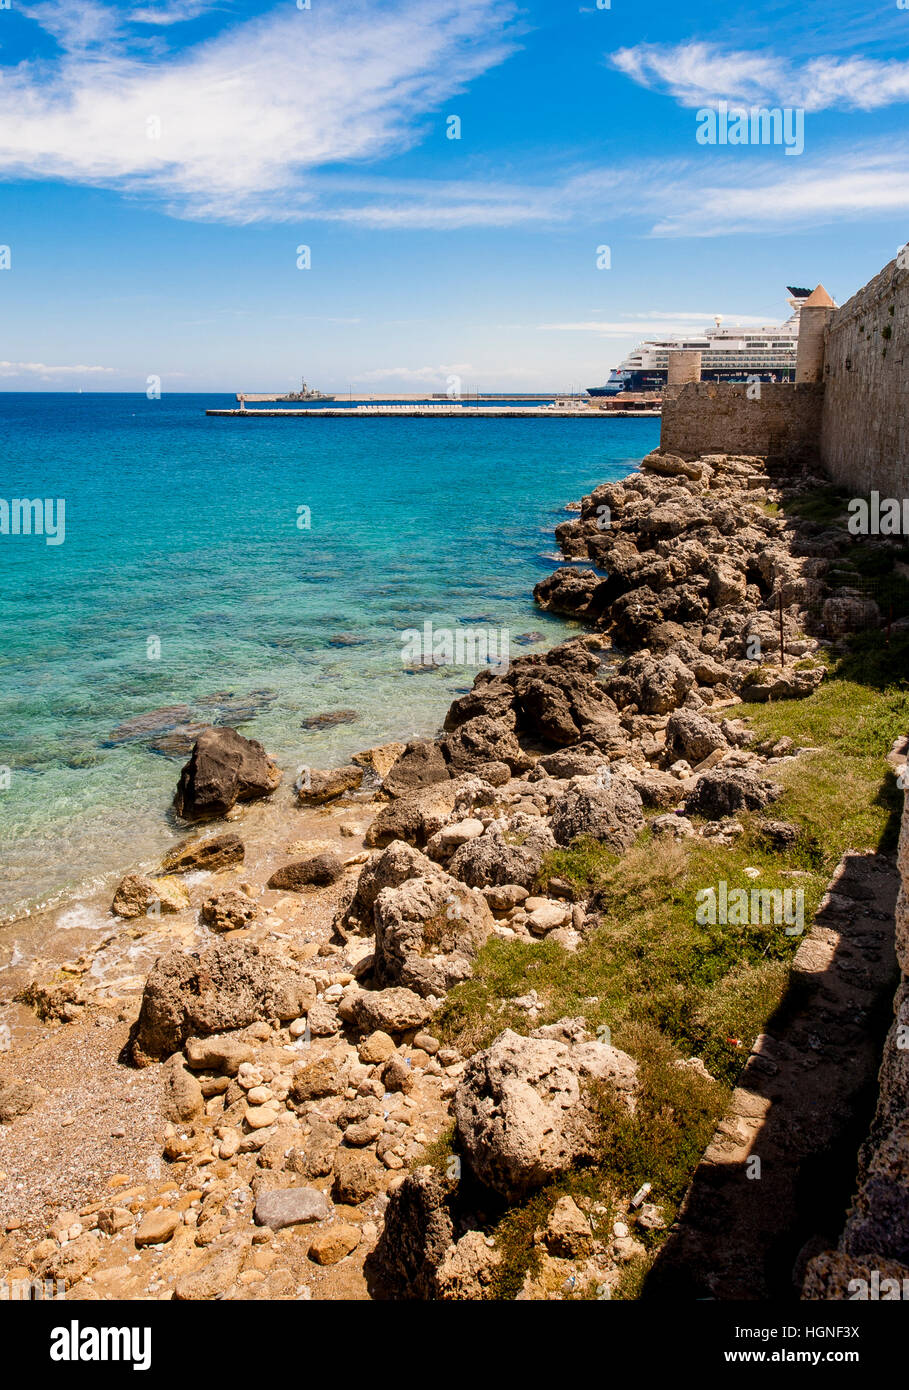 aegean sea with rhodes medieval wall leading to a moored ship in harbour Stock Photo